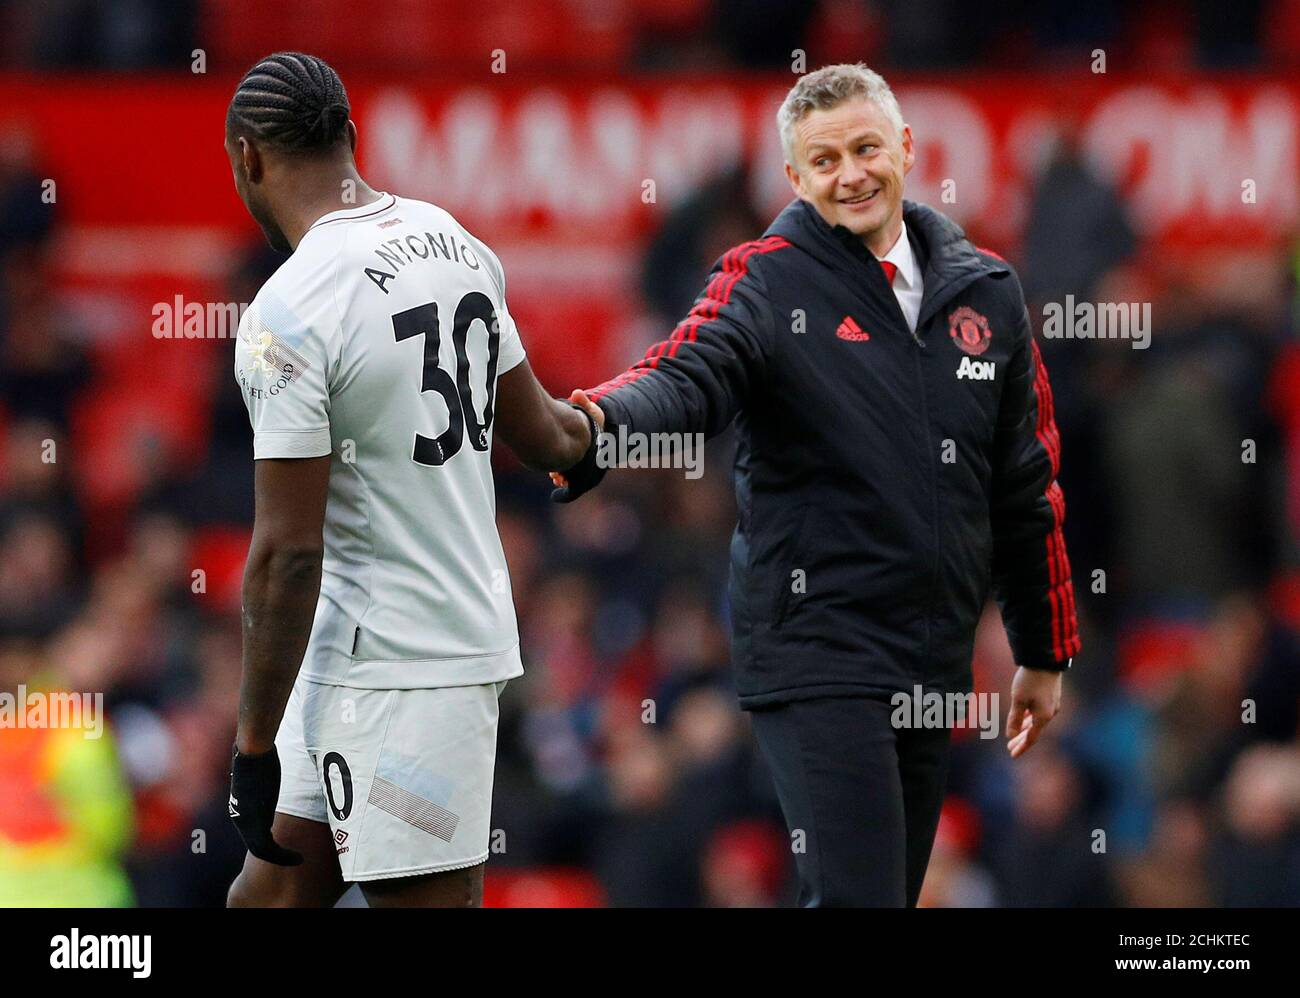 Manchester united v west ham united hi-res stock photography and images -  Alamy